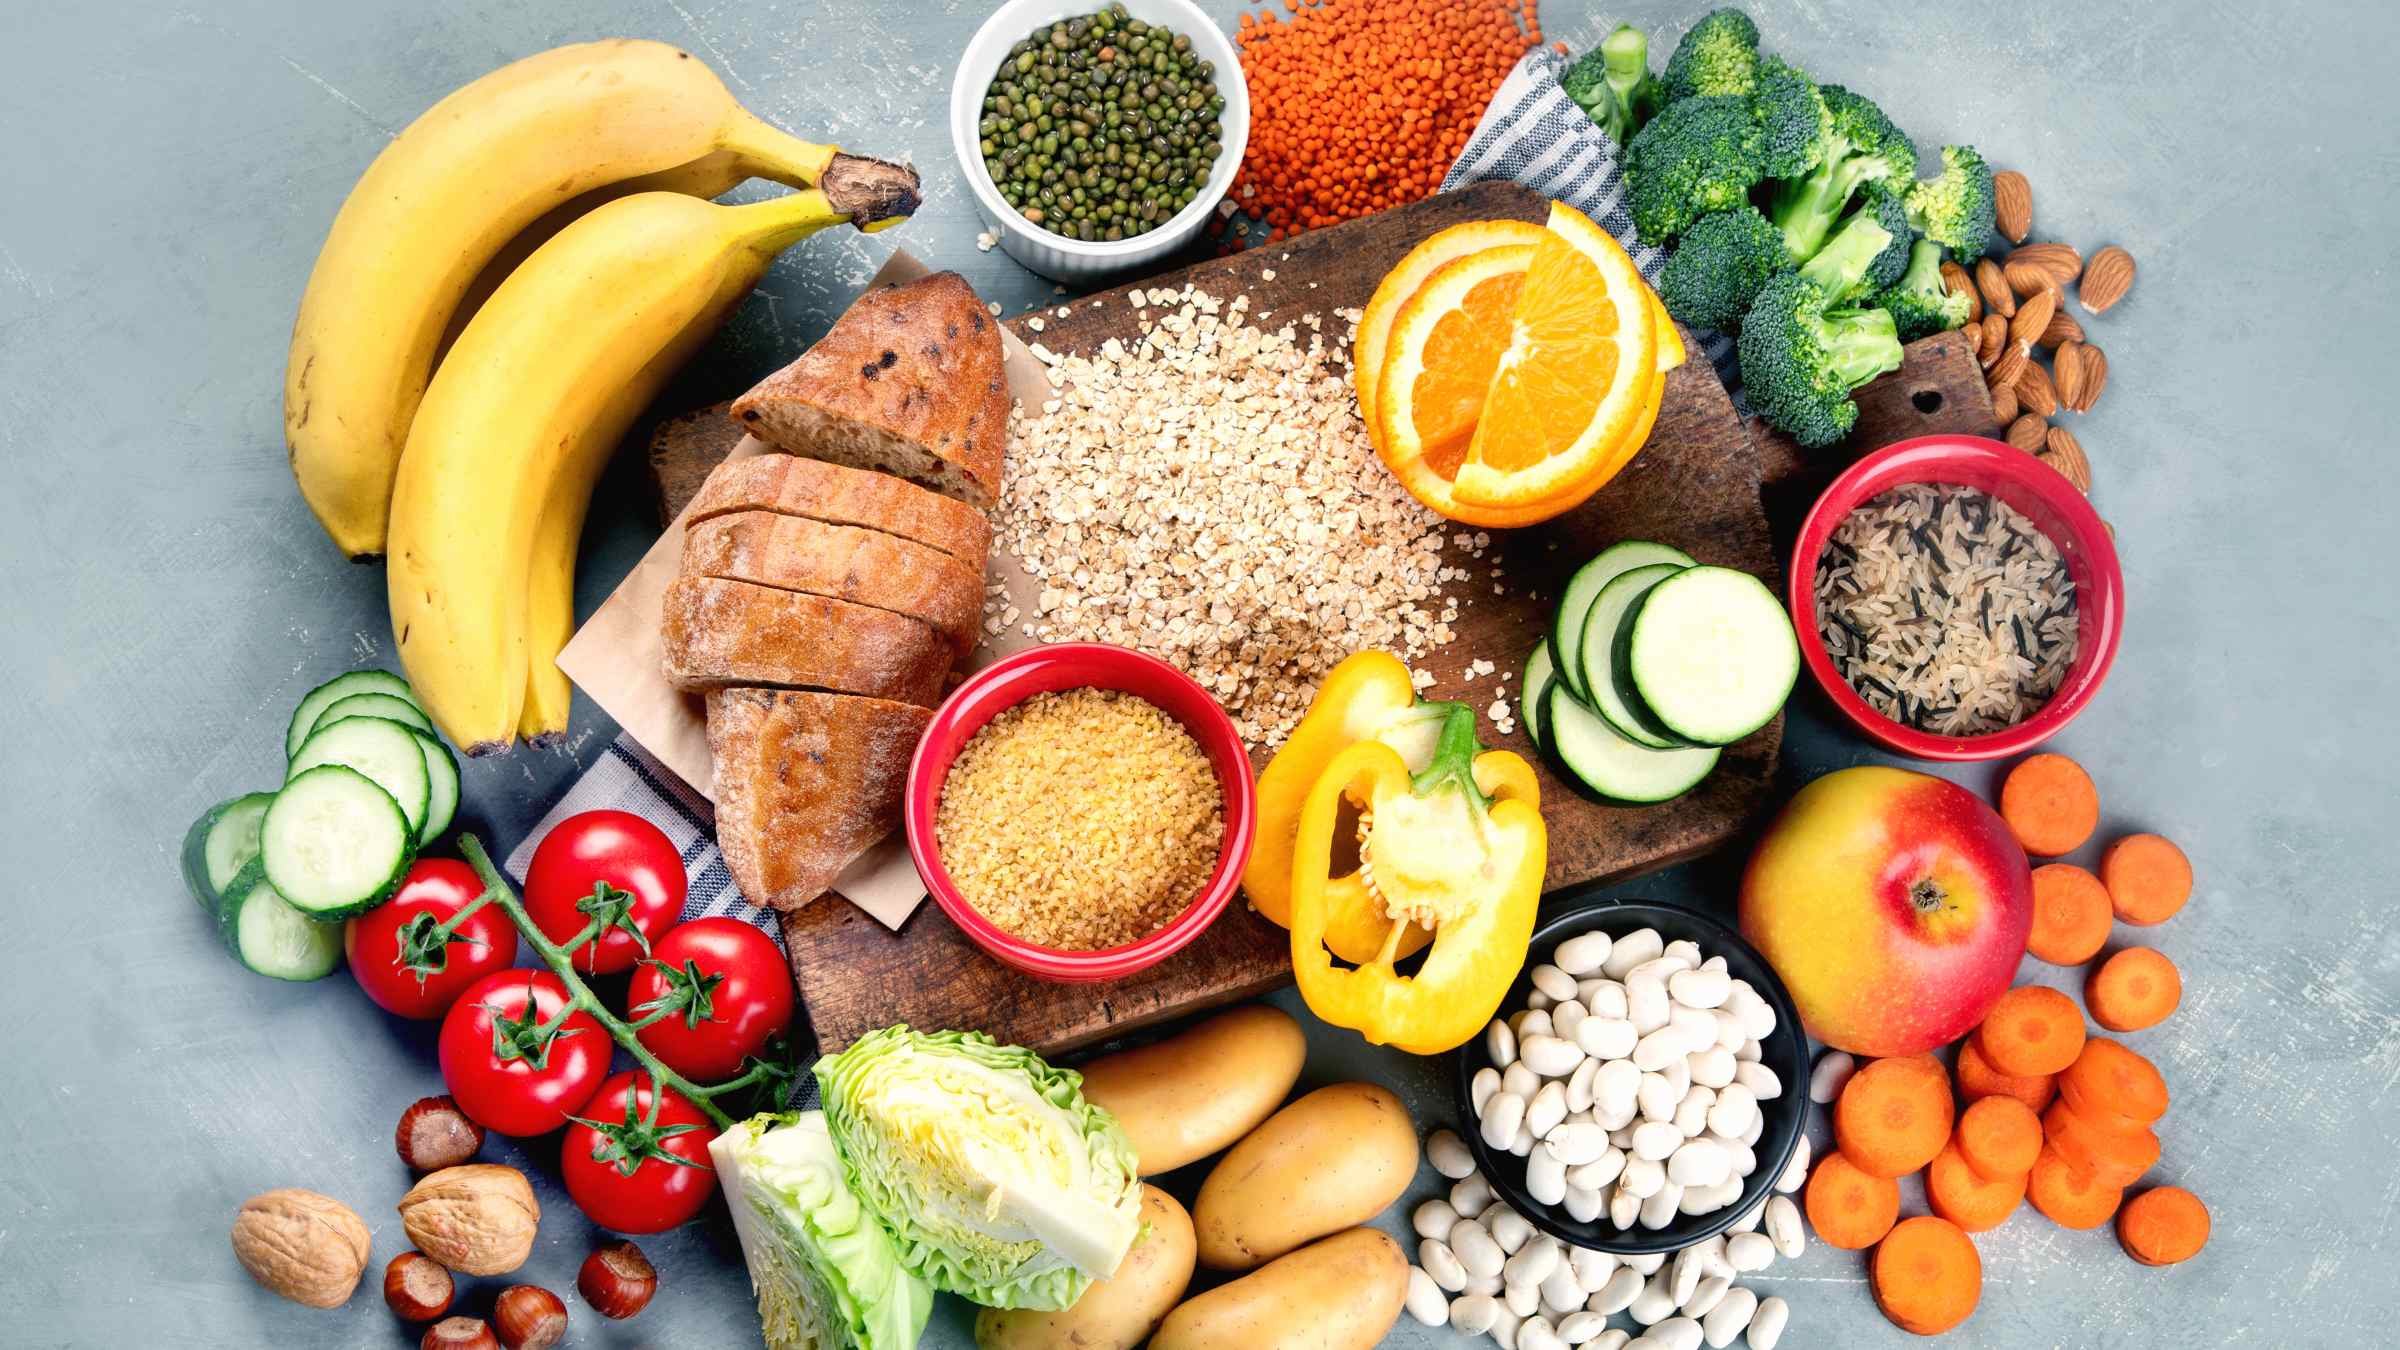 Healthy food lying on the table: vegetables, fruits, whole grains